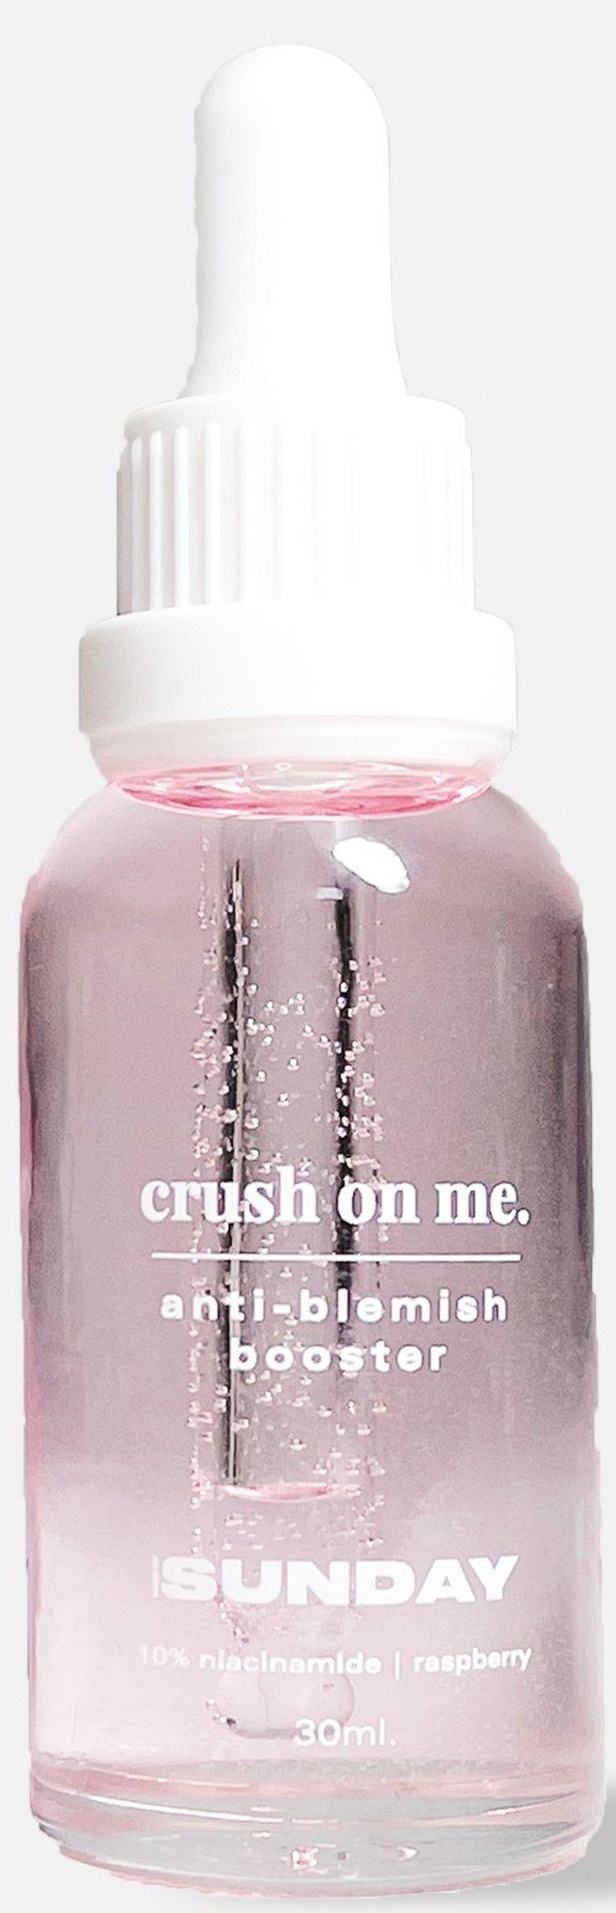 Made by Sunday Crush On Me 10% Niacinamide Booster